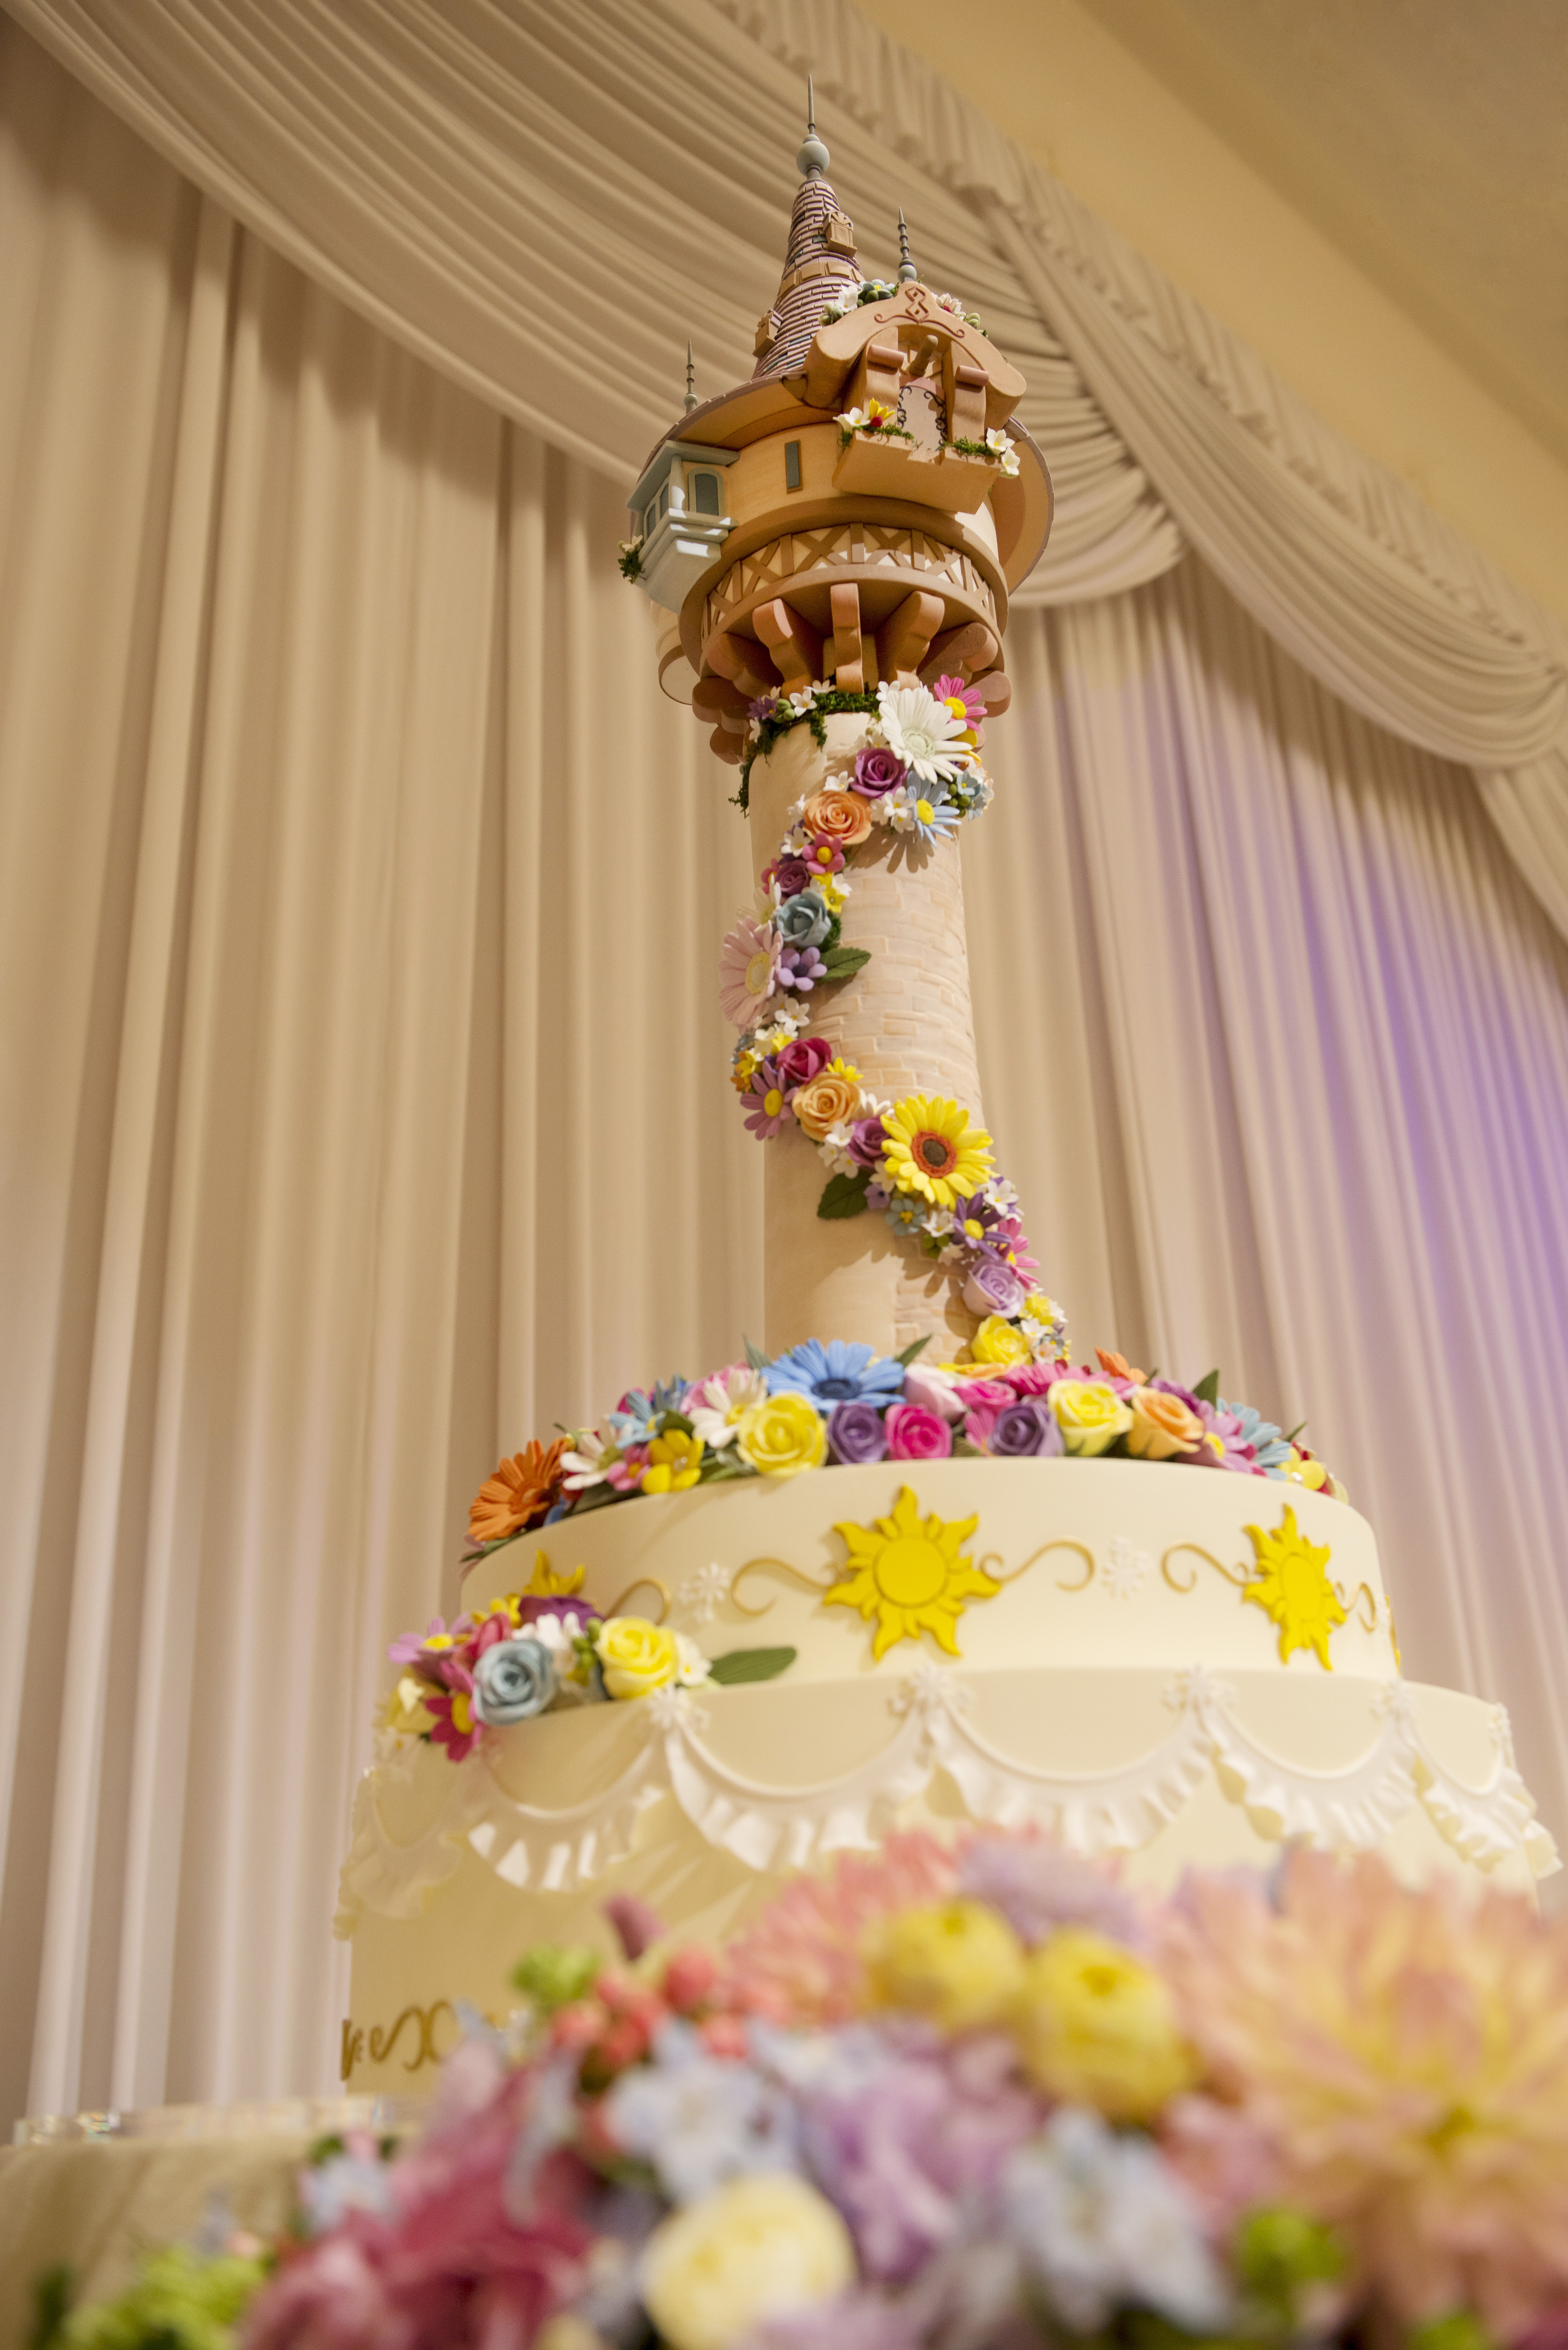 Tangled Wedding Cakes
 Tangled and Frozen Weddings Launch at Tokyo Disney Resort